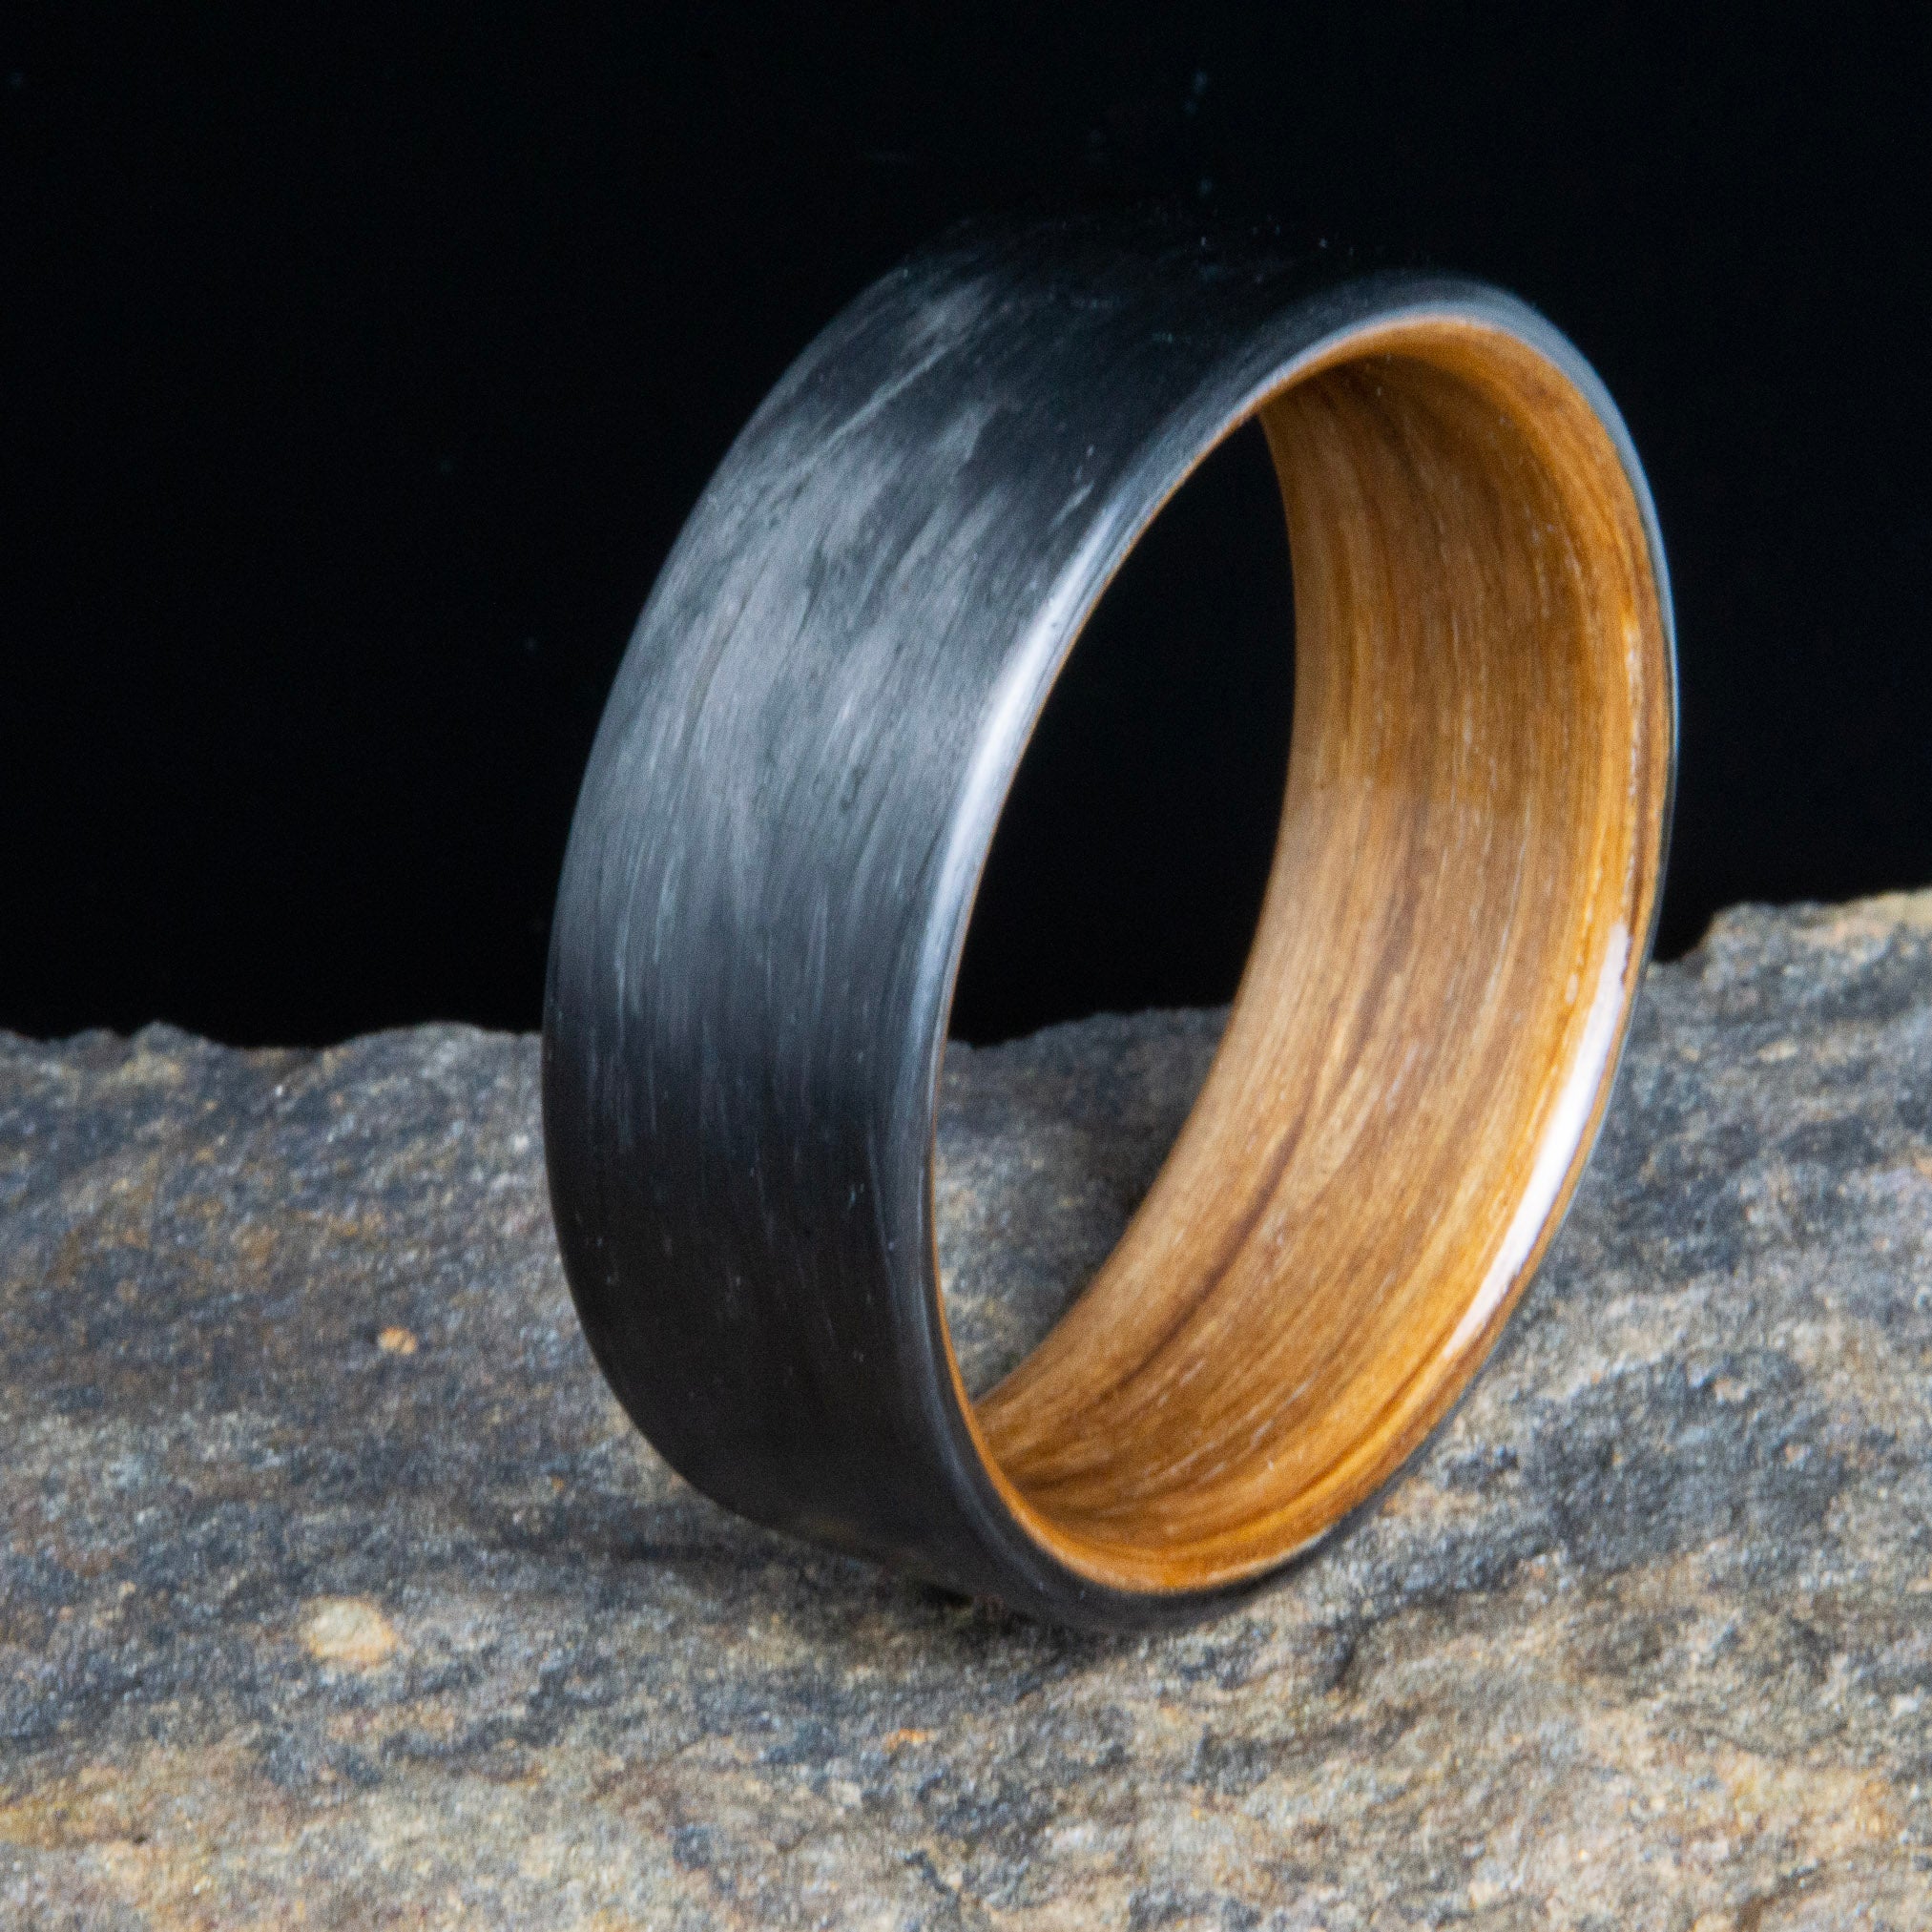 Carbon fiber and repurposed oak barn wood wedding band, wood and carbon fiber wedding band for outdoorsmen, hunters, ring for mountain bikers, wedding band for hikers